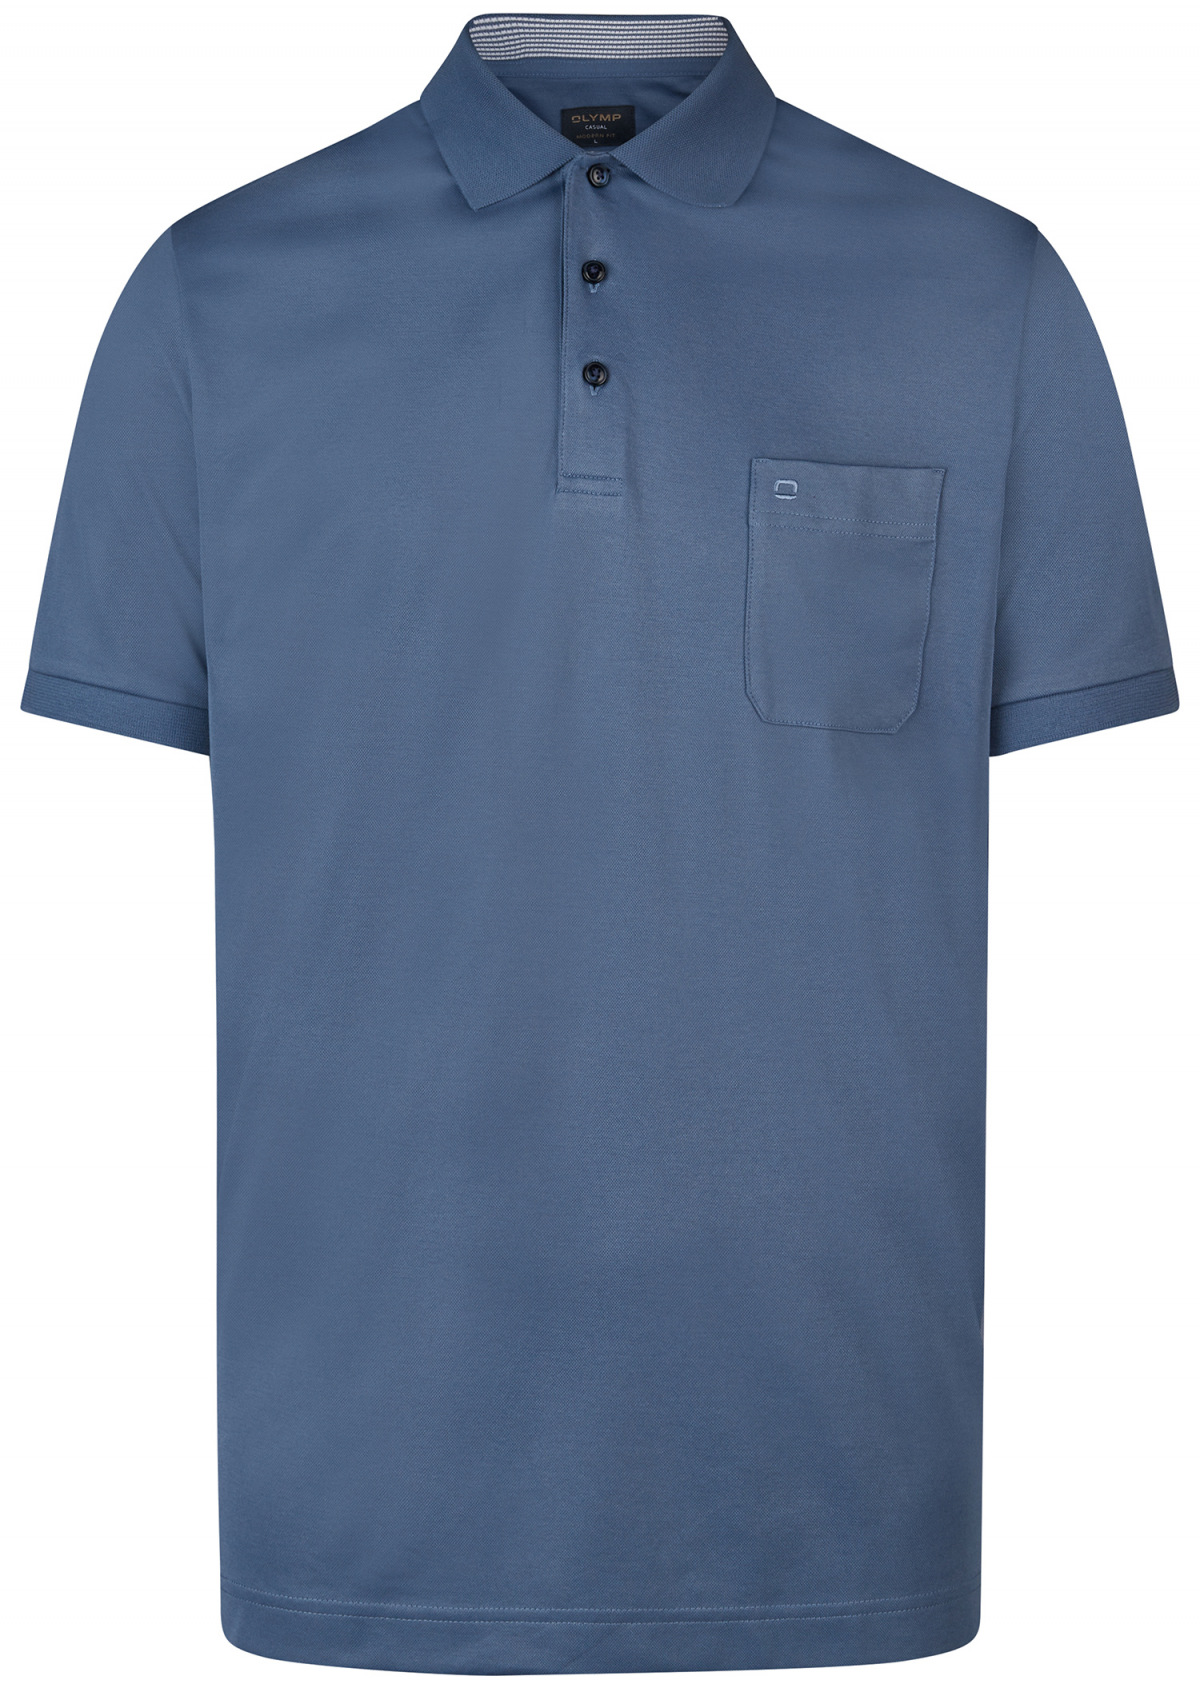 OLYMP Poloshirt - Casual Fit - Active Dry - graublau